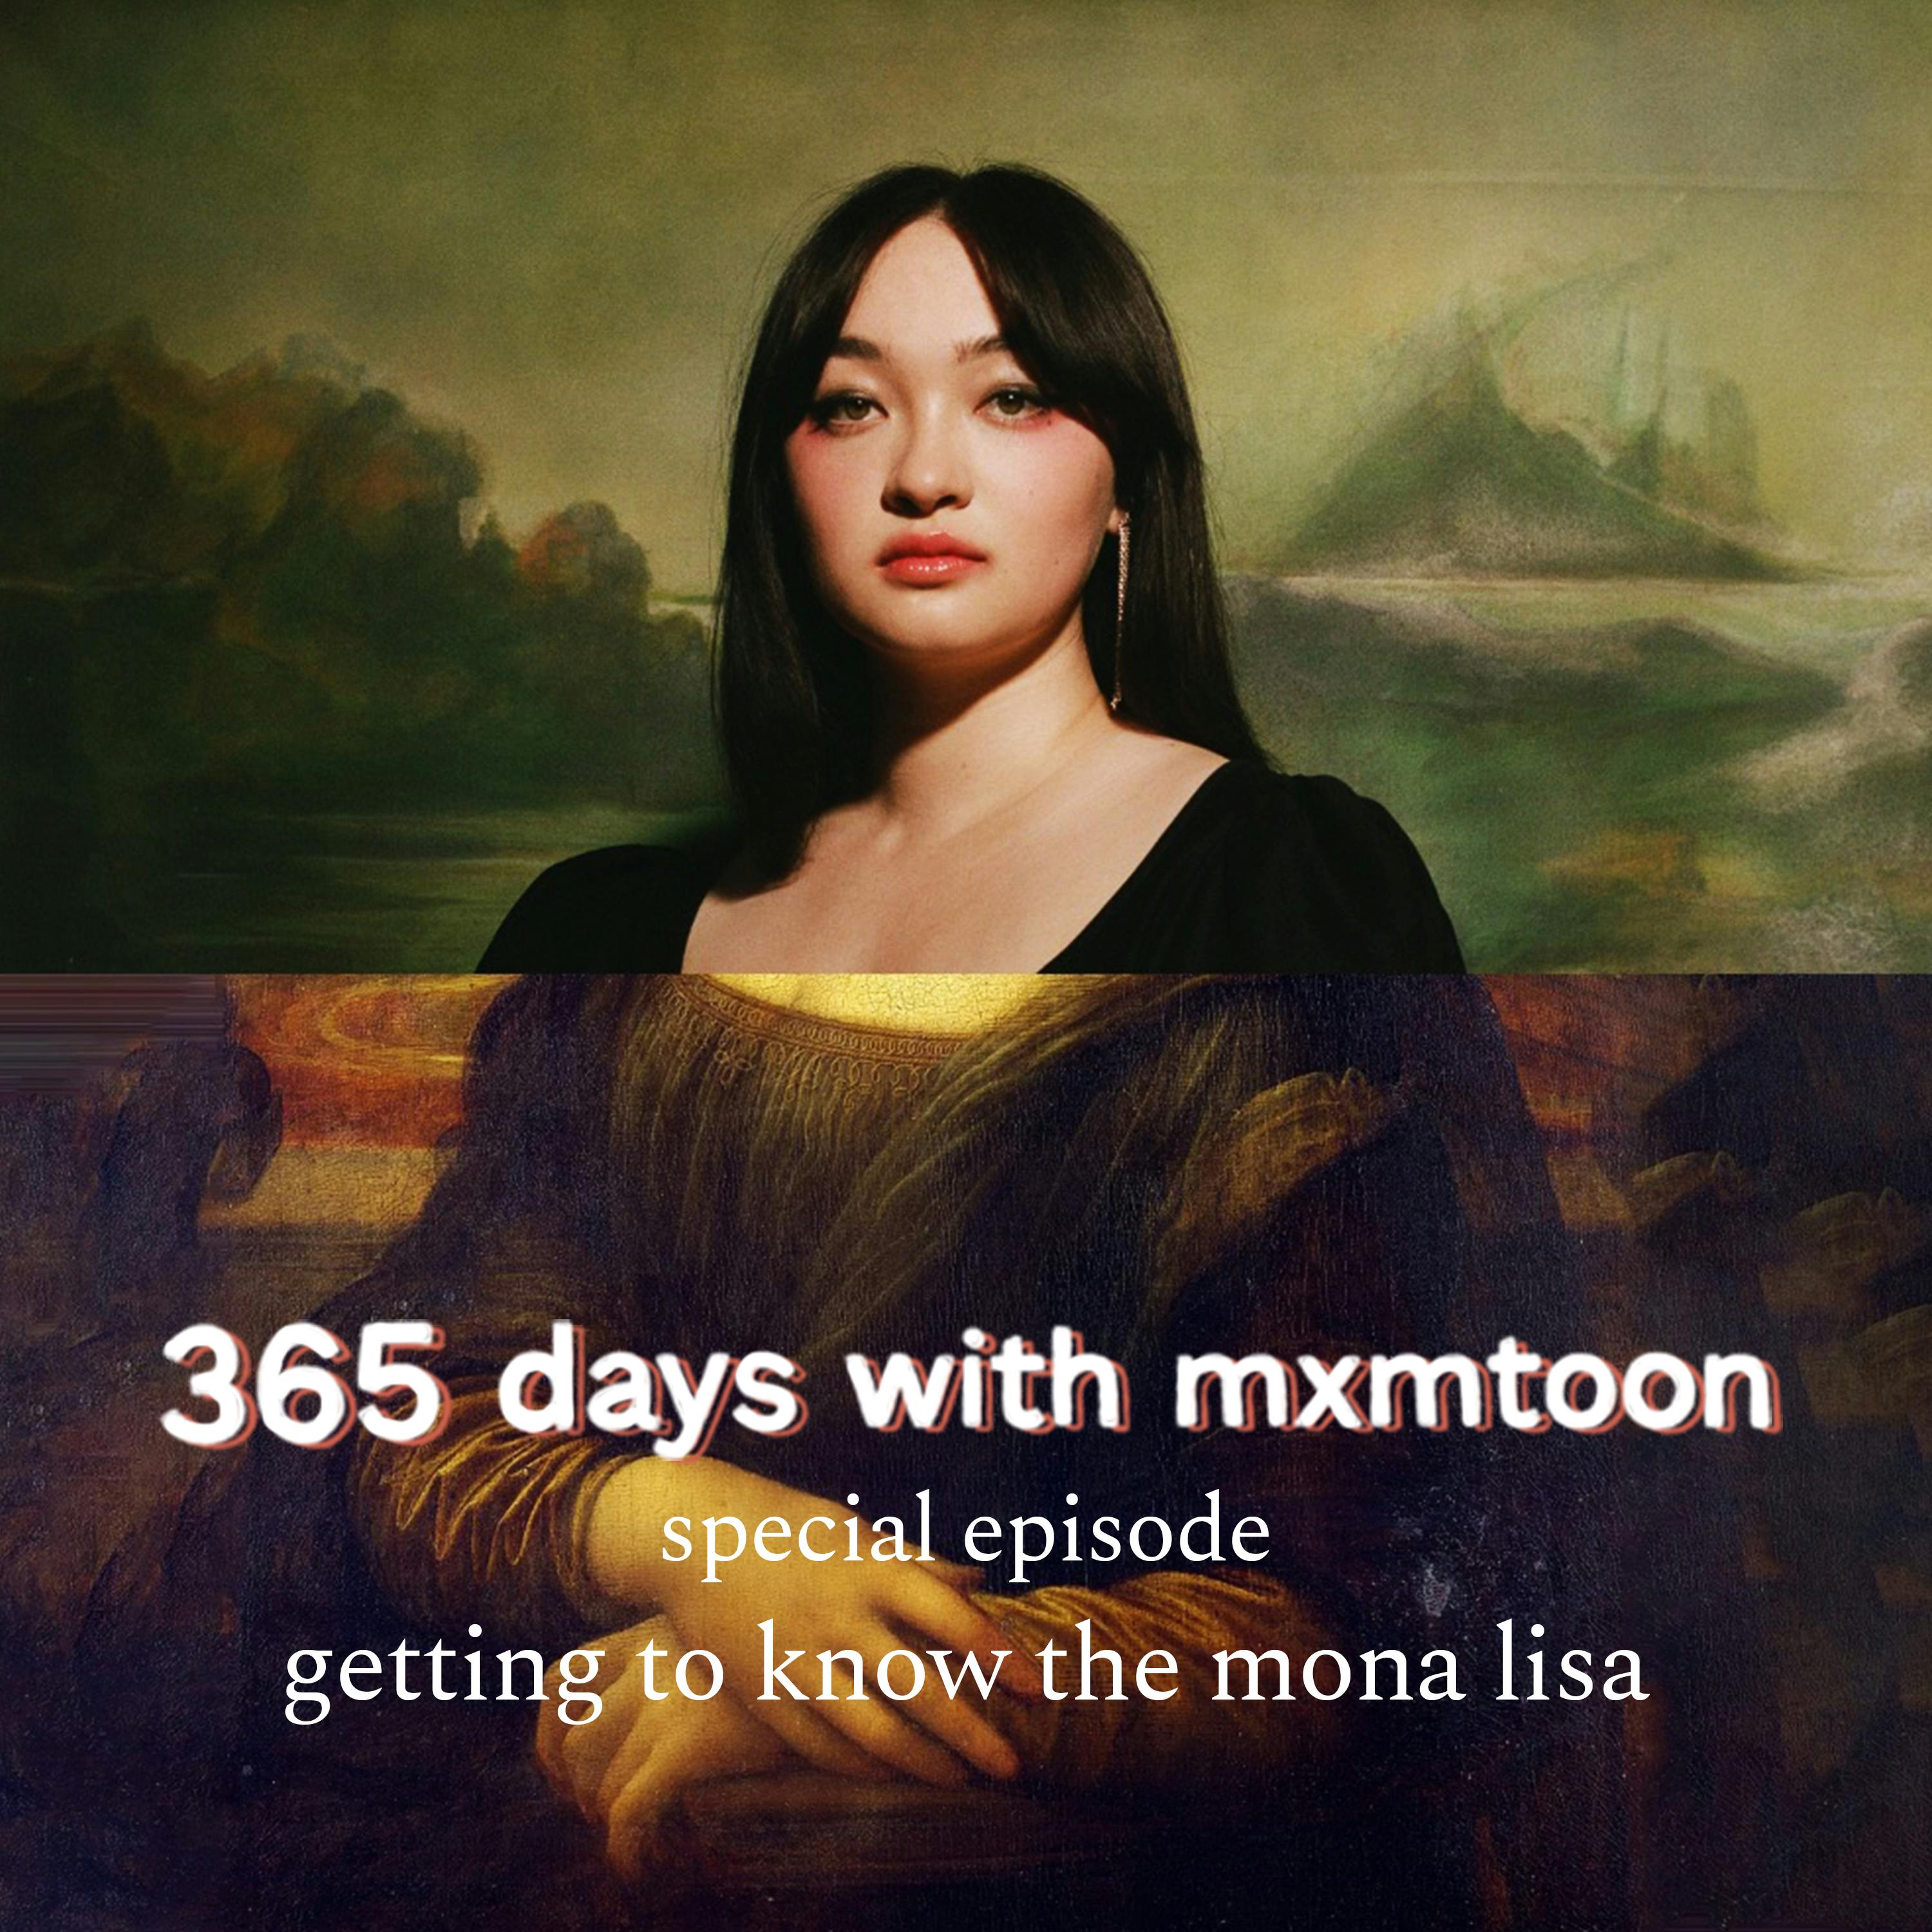 special episode: getting to know the mona lisa